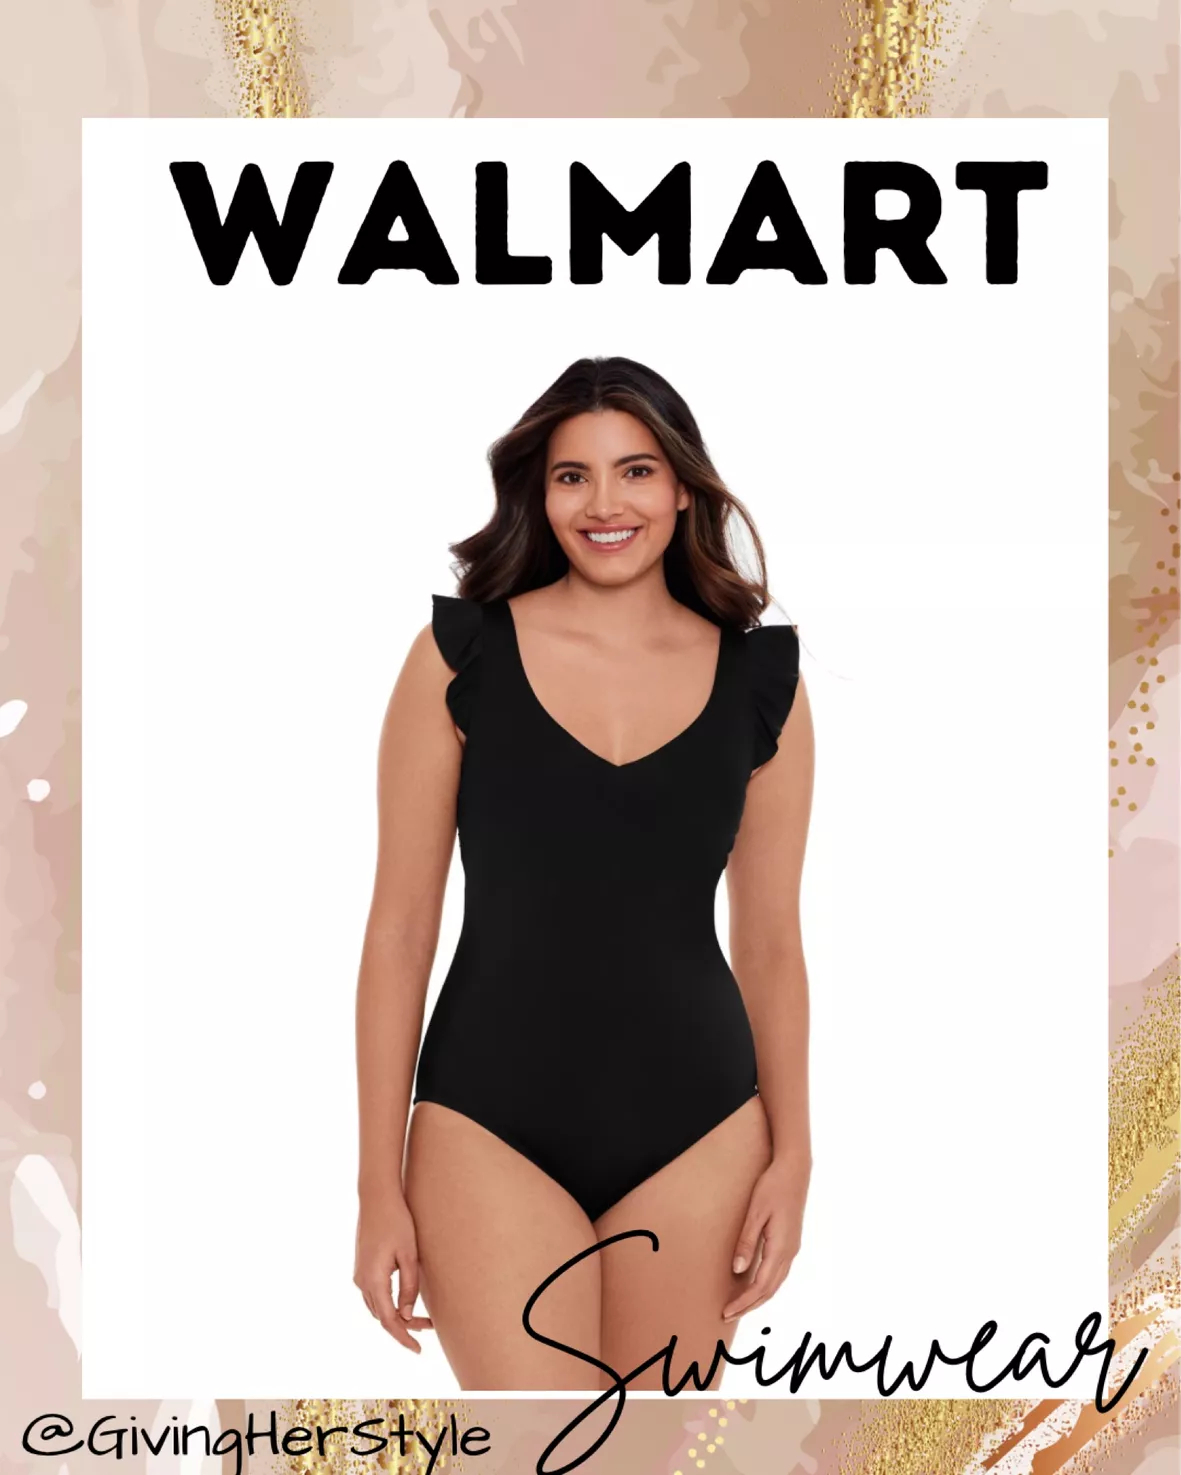 Time and Tru Womens Swimsuits in Womens Swimsuits 